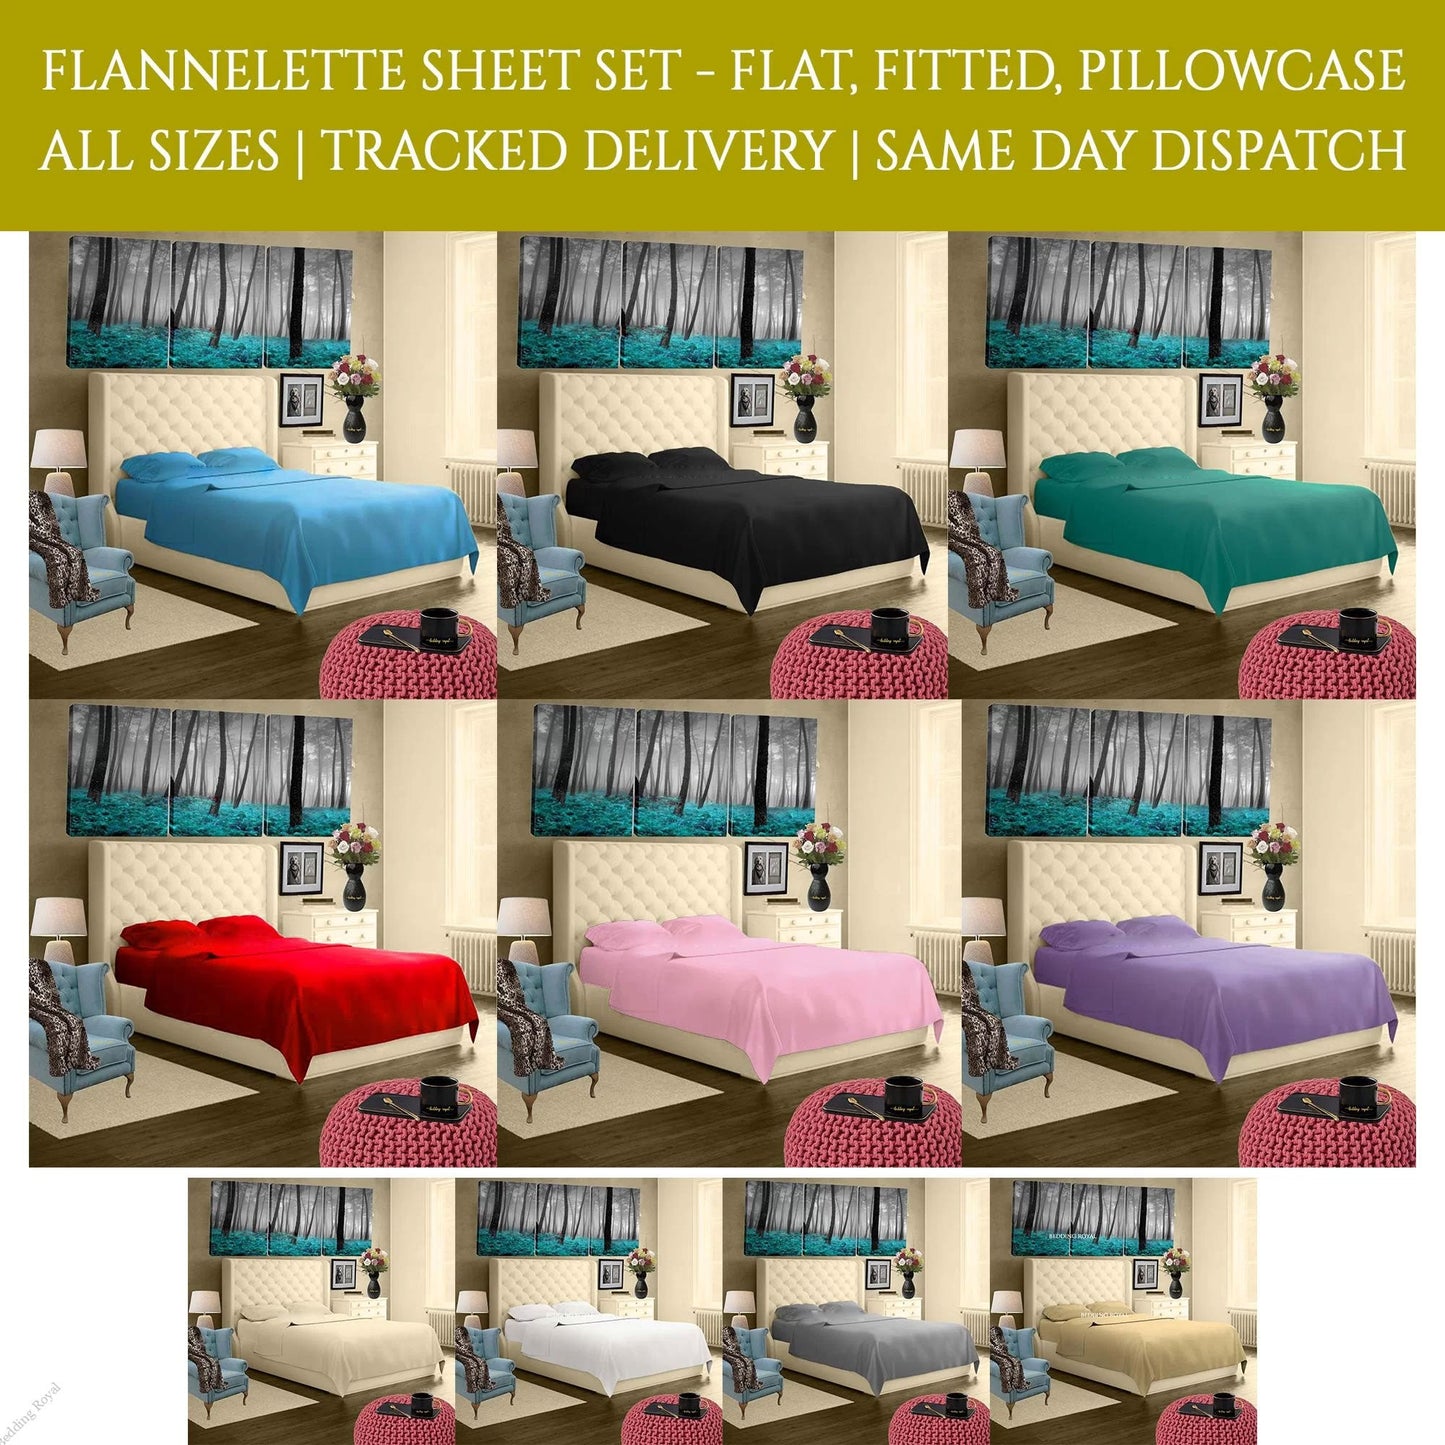 Flannelette Flat Bed Sheet 100% Brushed Cotton Or Pillowcase Cover - TheComfortshop.co.ukBed Sheets0721718967026thecomfortshopTheComfortshop.co.ukFlannelette FLAT Latte SingleLatteSingleFlannelette Flat Bed Sheet 100% Brushed Cotton Or Pillowcase Cover - TheComfortshop.co.uk